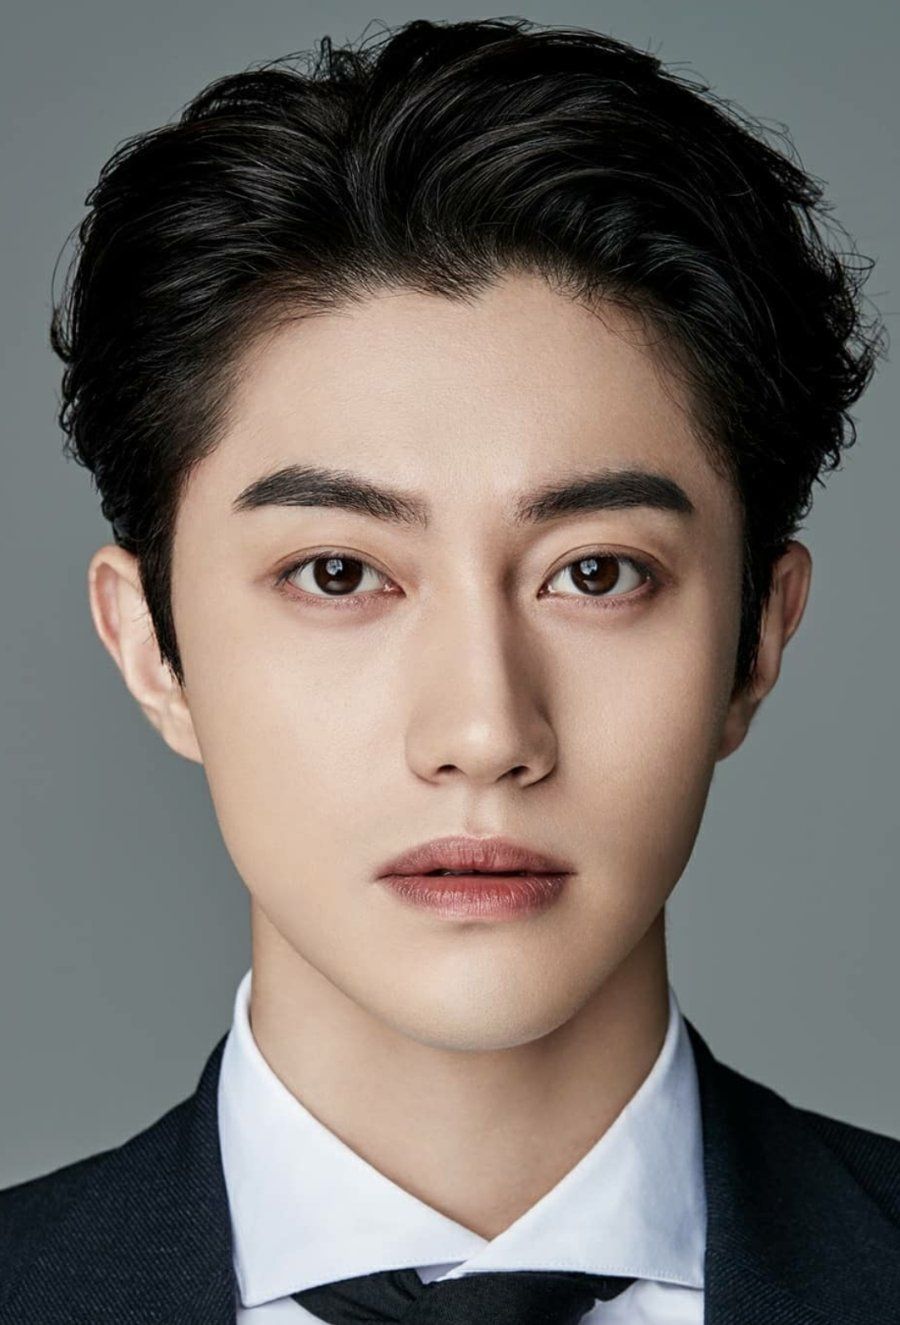 He Is A South Korean Actor And A Singer Trainee Under H& Entertainment. He Is Best Known For His Suppo. Kwak Dong Yeon, Handsome Korean Actors, Korean Male Actors